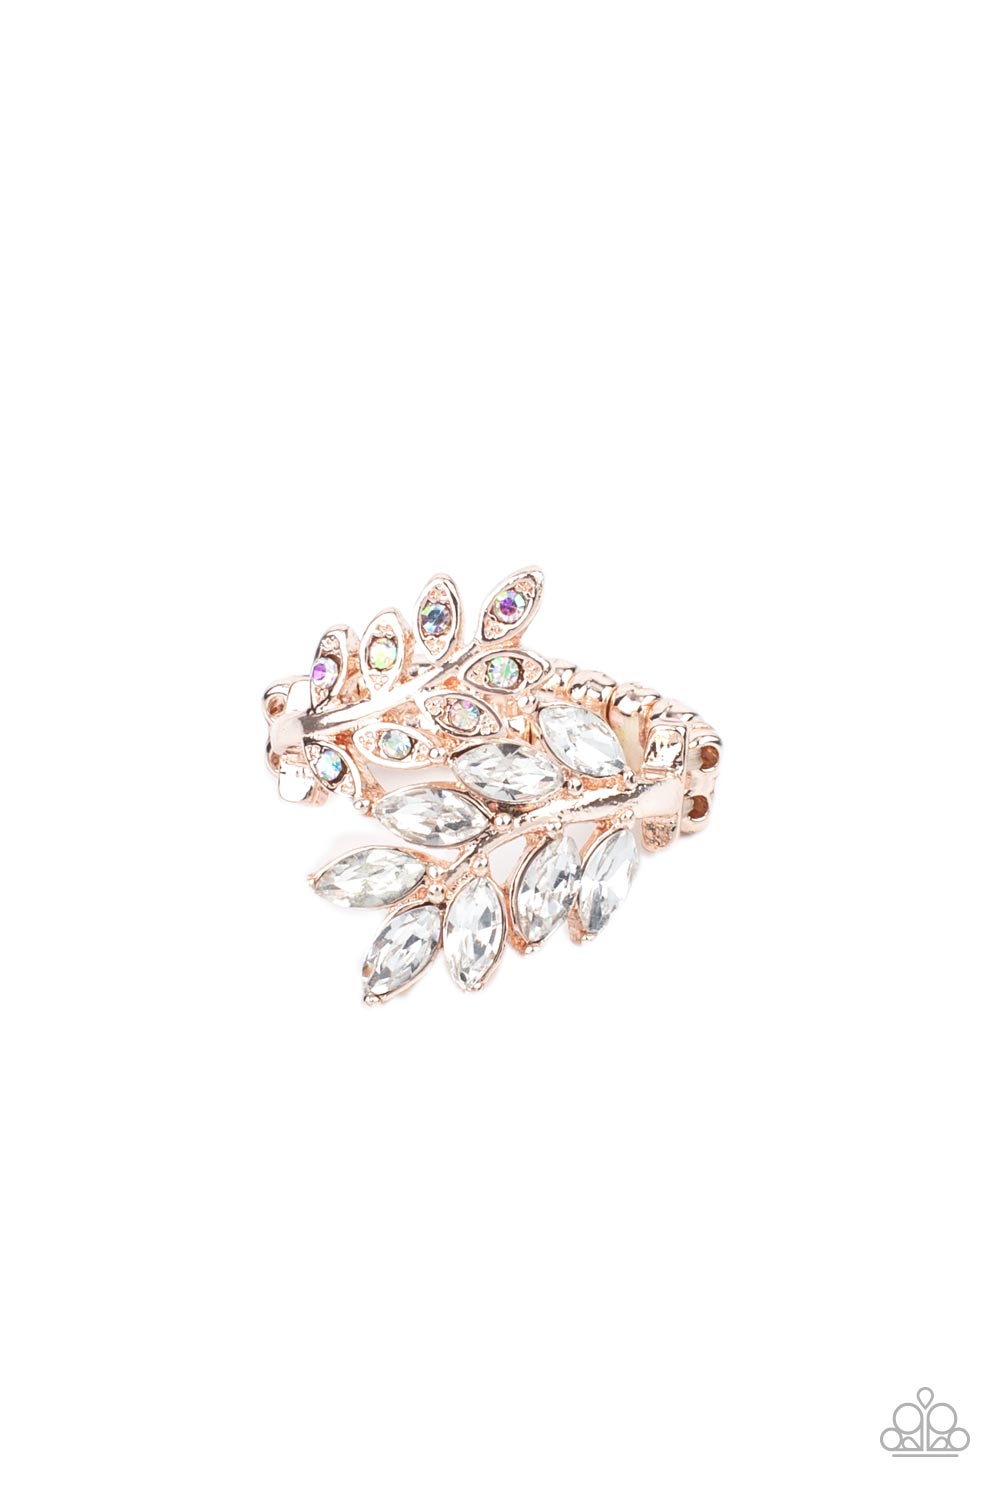 Glowing Gardenista Rose Gold Ring - Paparazzi Accessories  Encrusted in glassy white and iridescent rhinestones, two leafy rose gold bands delicately overlap across the finger for a sparkly seasonal look. Features a stretchy band for a flexible fit.  Featured inside The Preview at GLOW!  Sold as one individual ring.